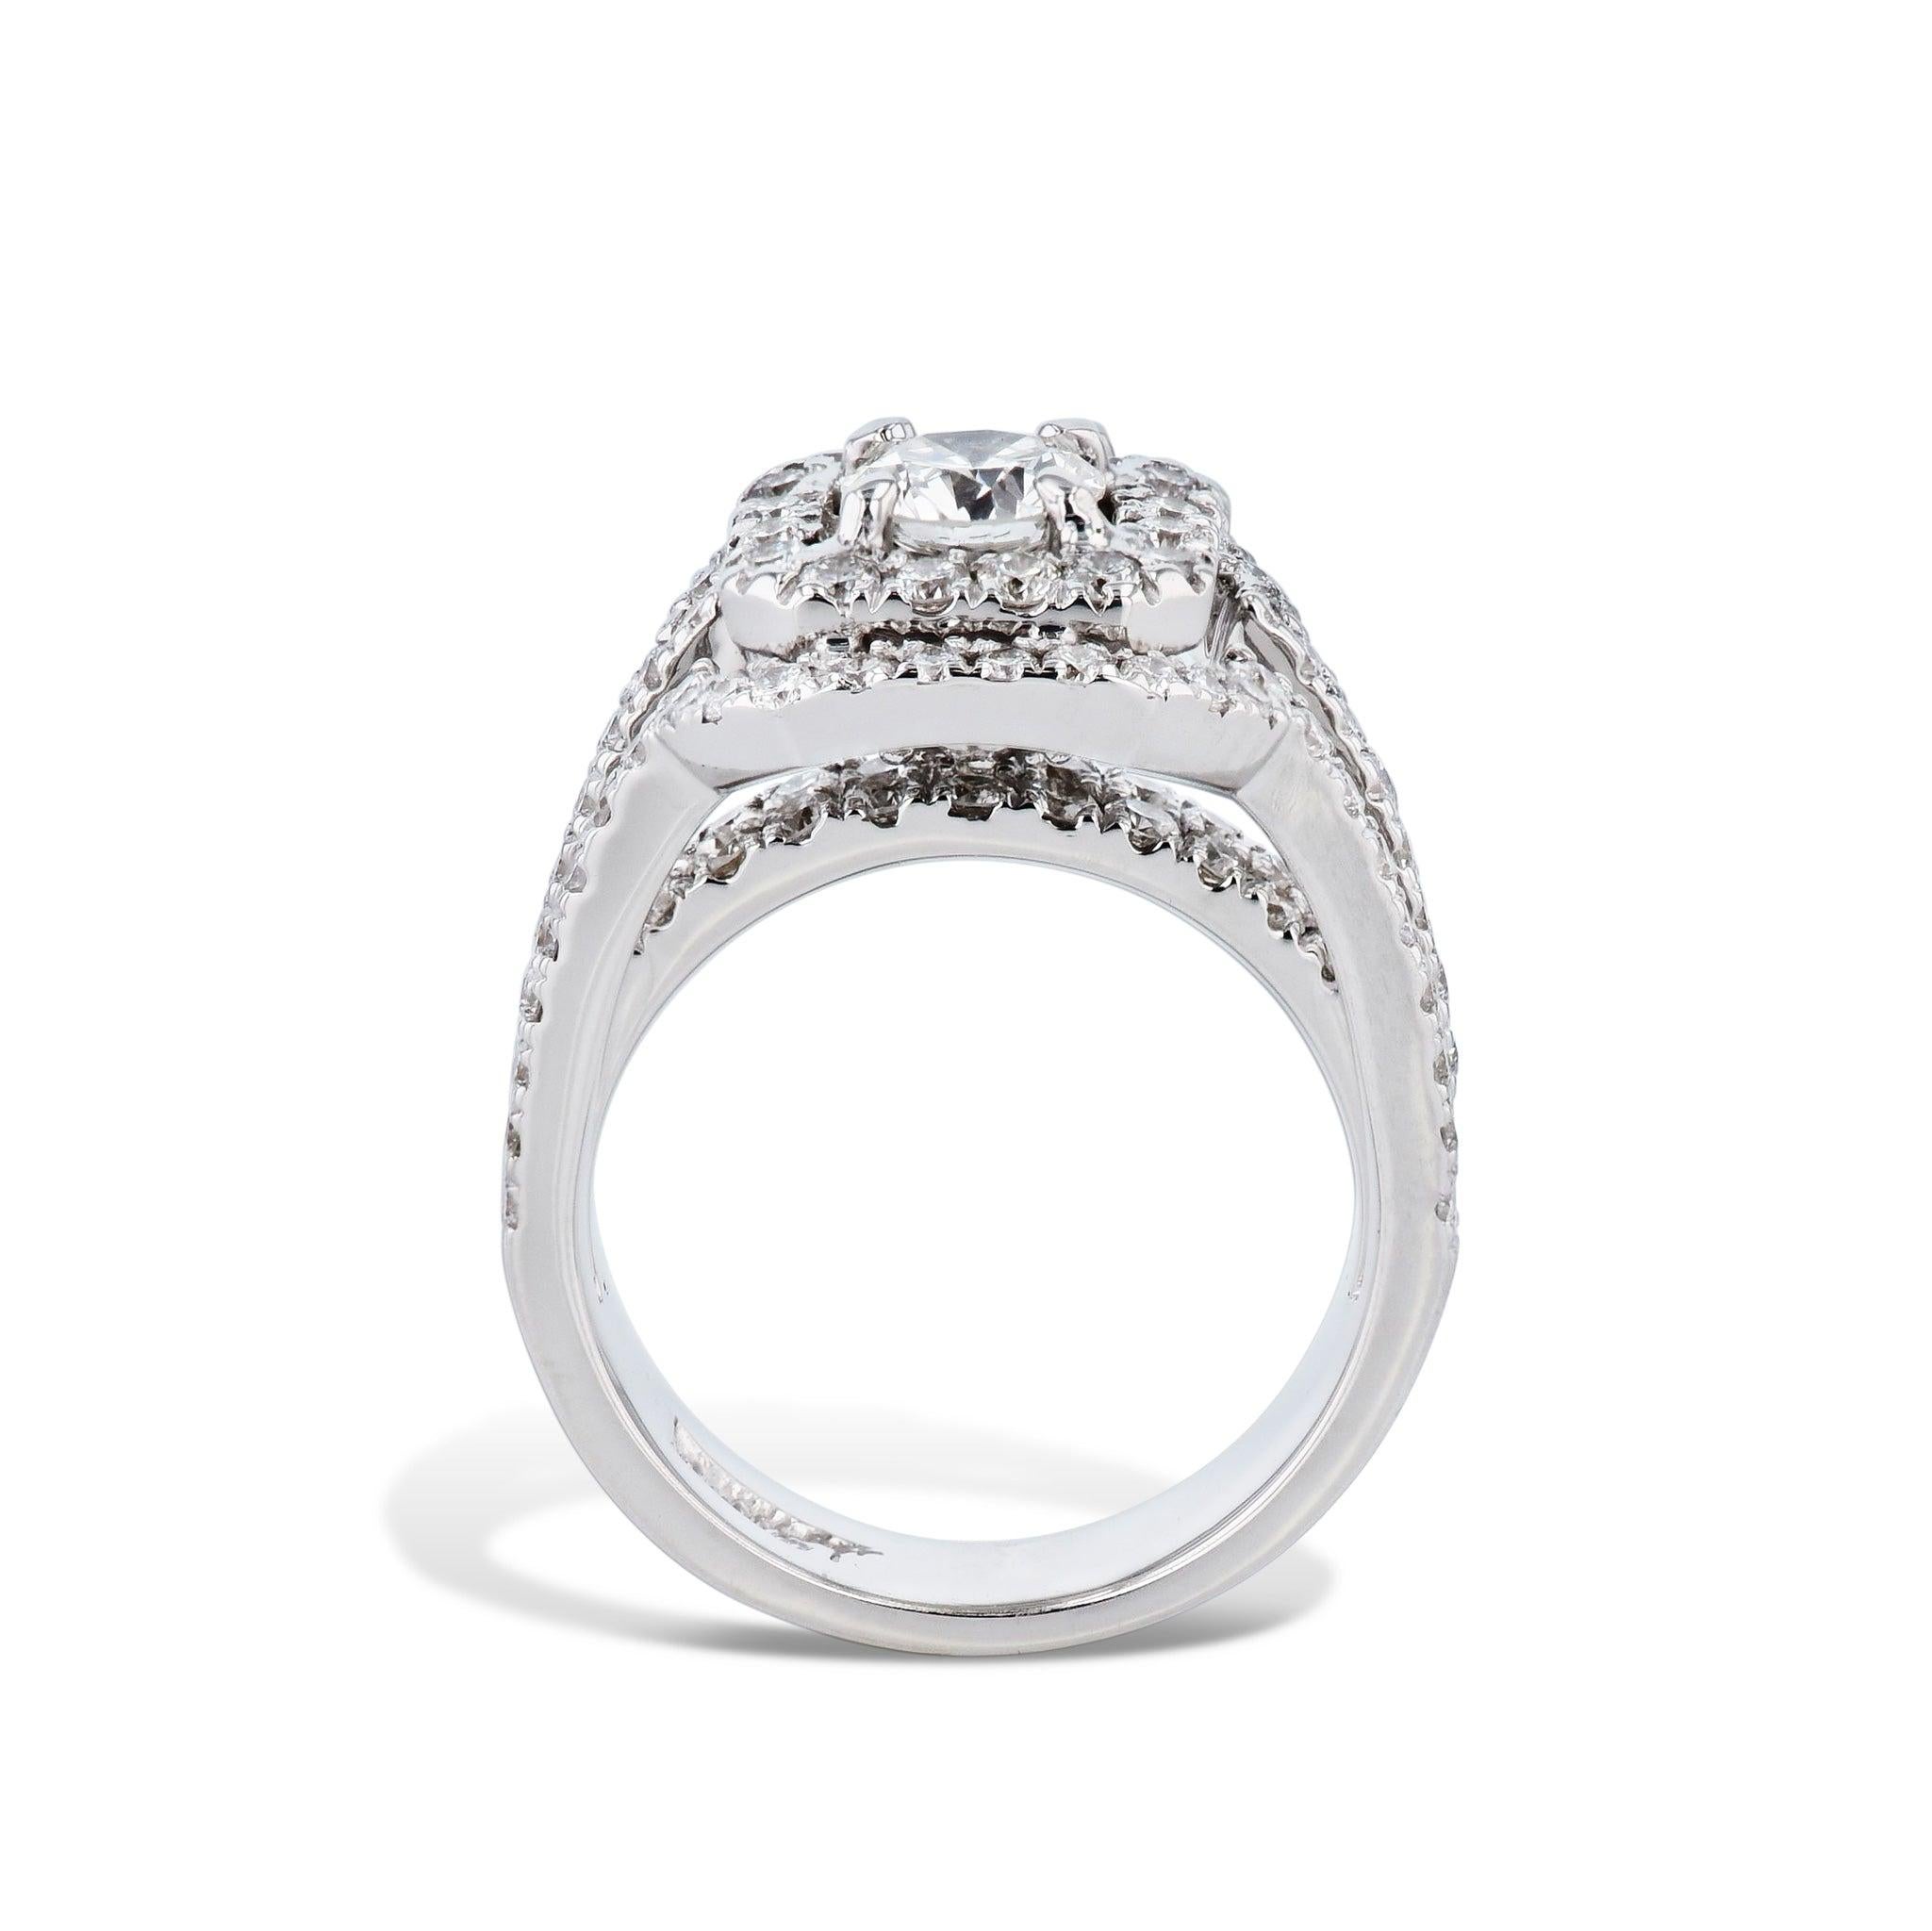 A beautiful 18kt white gold estate ring, showcasing an impressive round diamond at its center. A further 122 diamonds, Pave set around the center stone and along the shank, make this a true showstopper! With a size of 4.5 it is perfect for making a